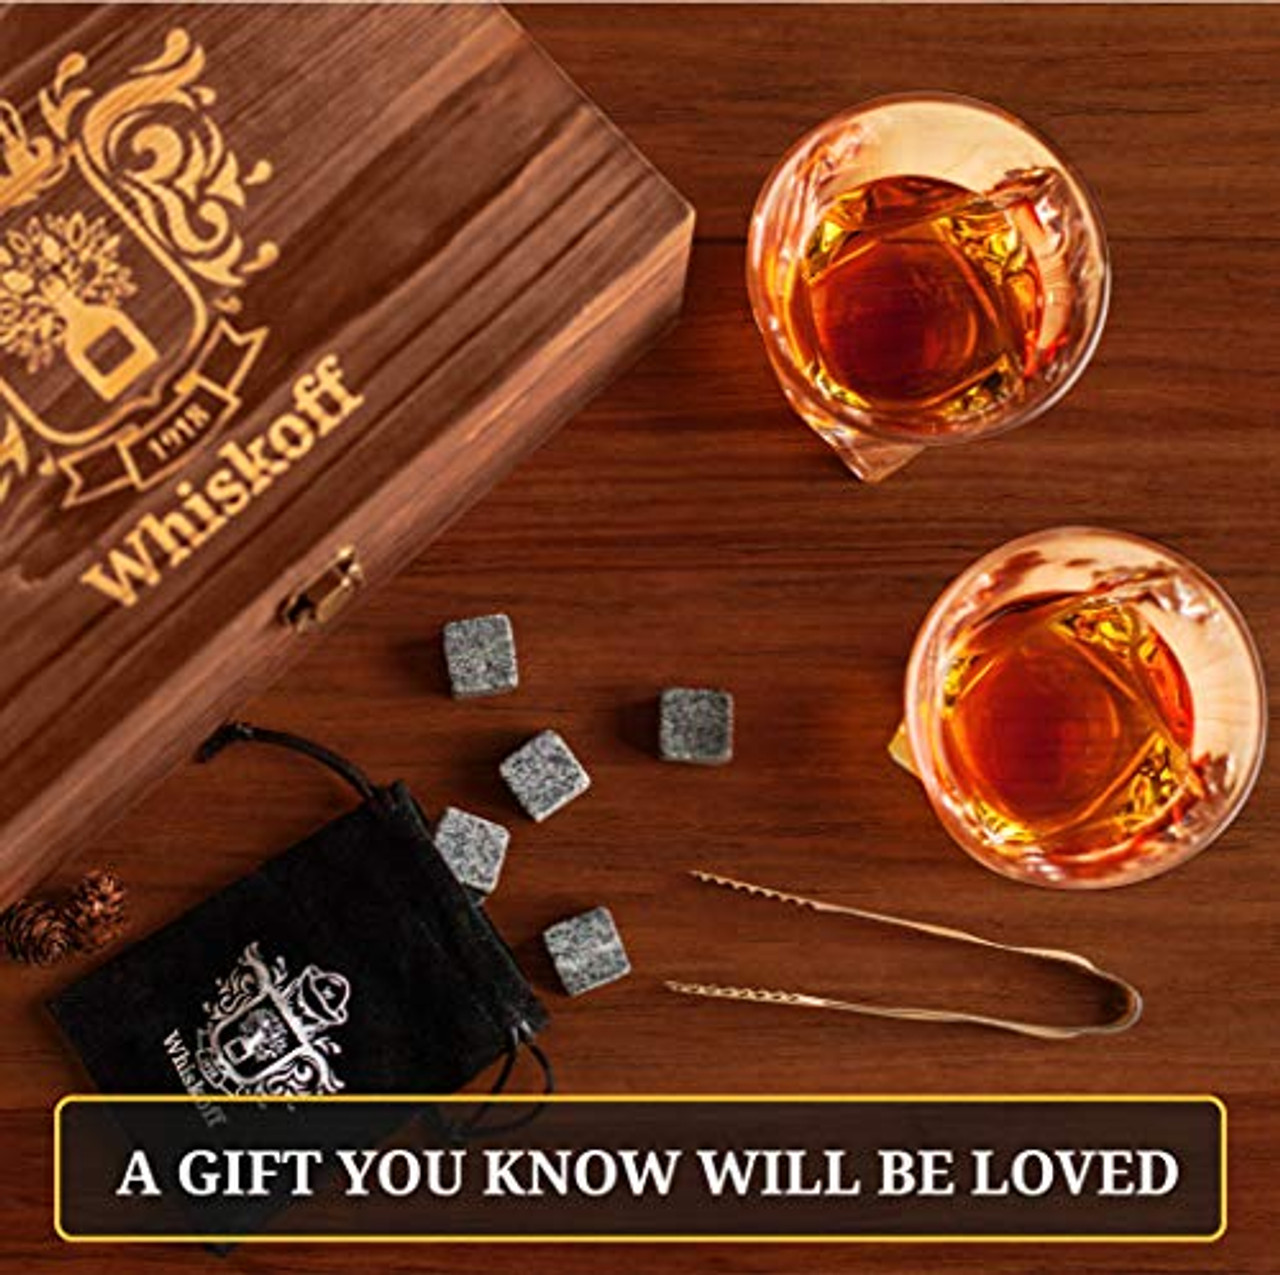 Whiskey Glass Set of 2 - Bourbon Stones Gift For Men Includes Crystal Whisky